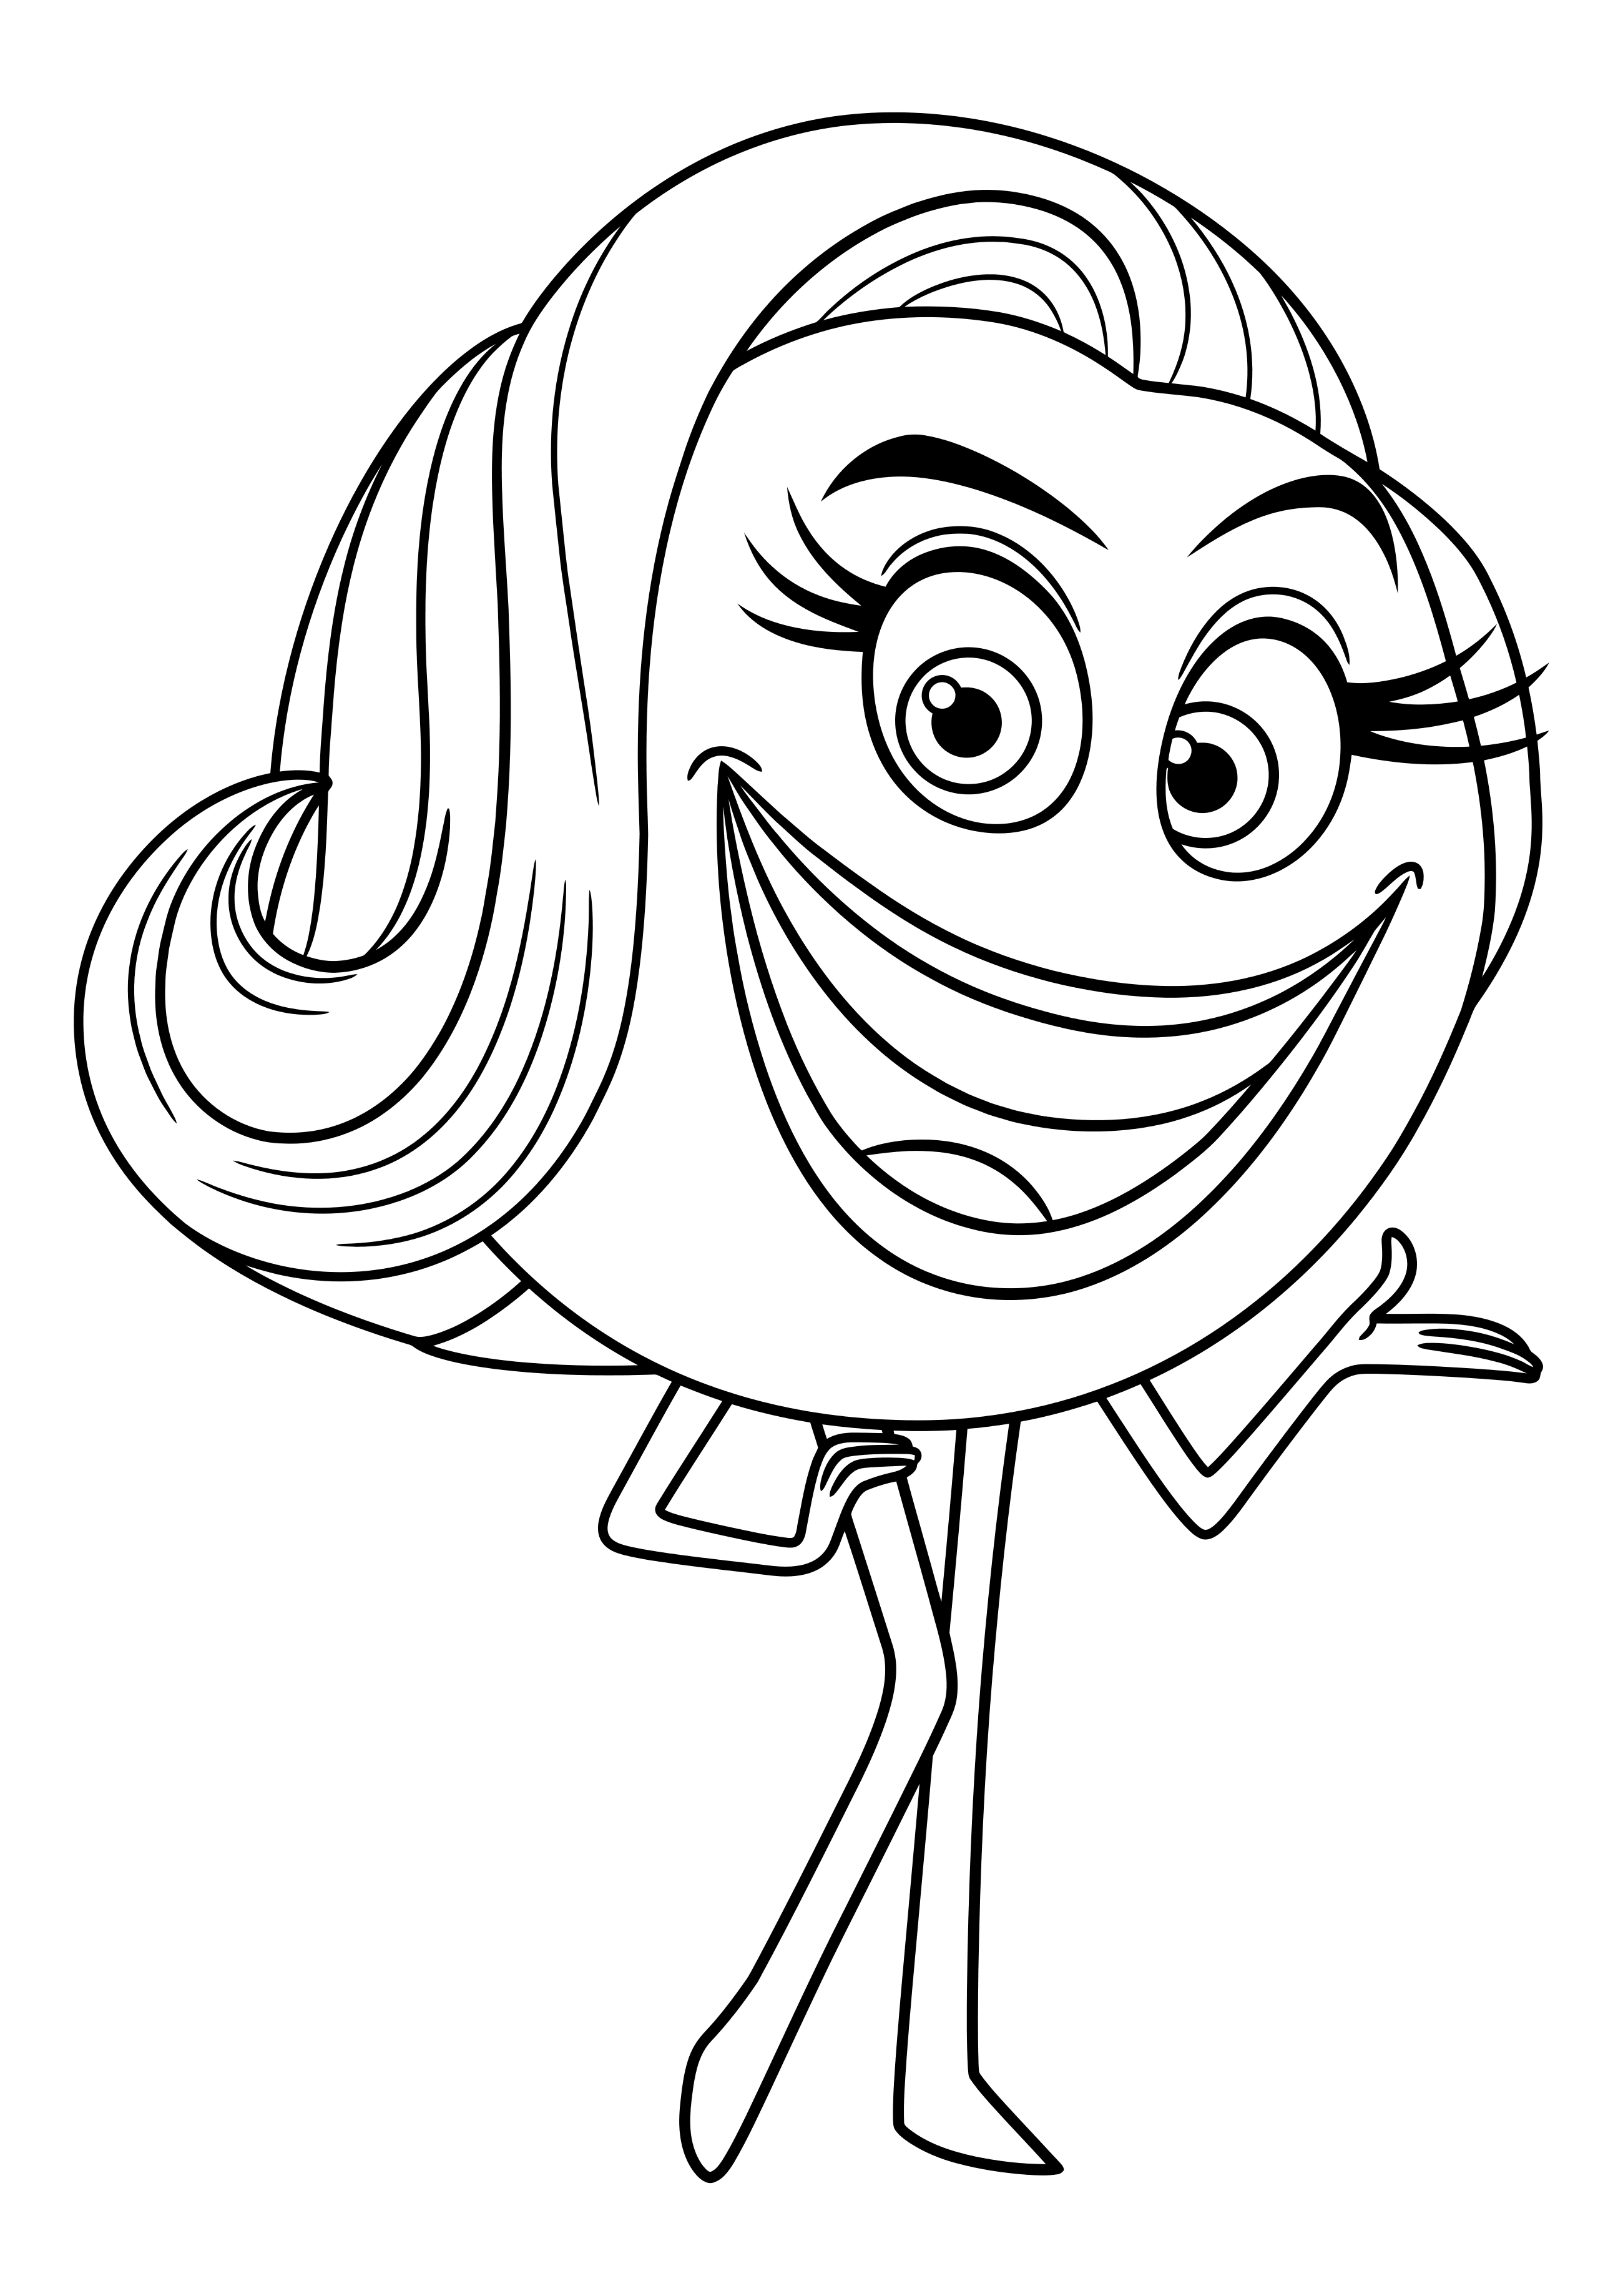 The Emoji Movie coloring page to download and print for free